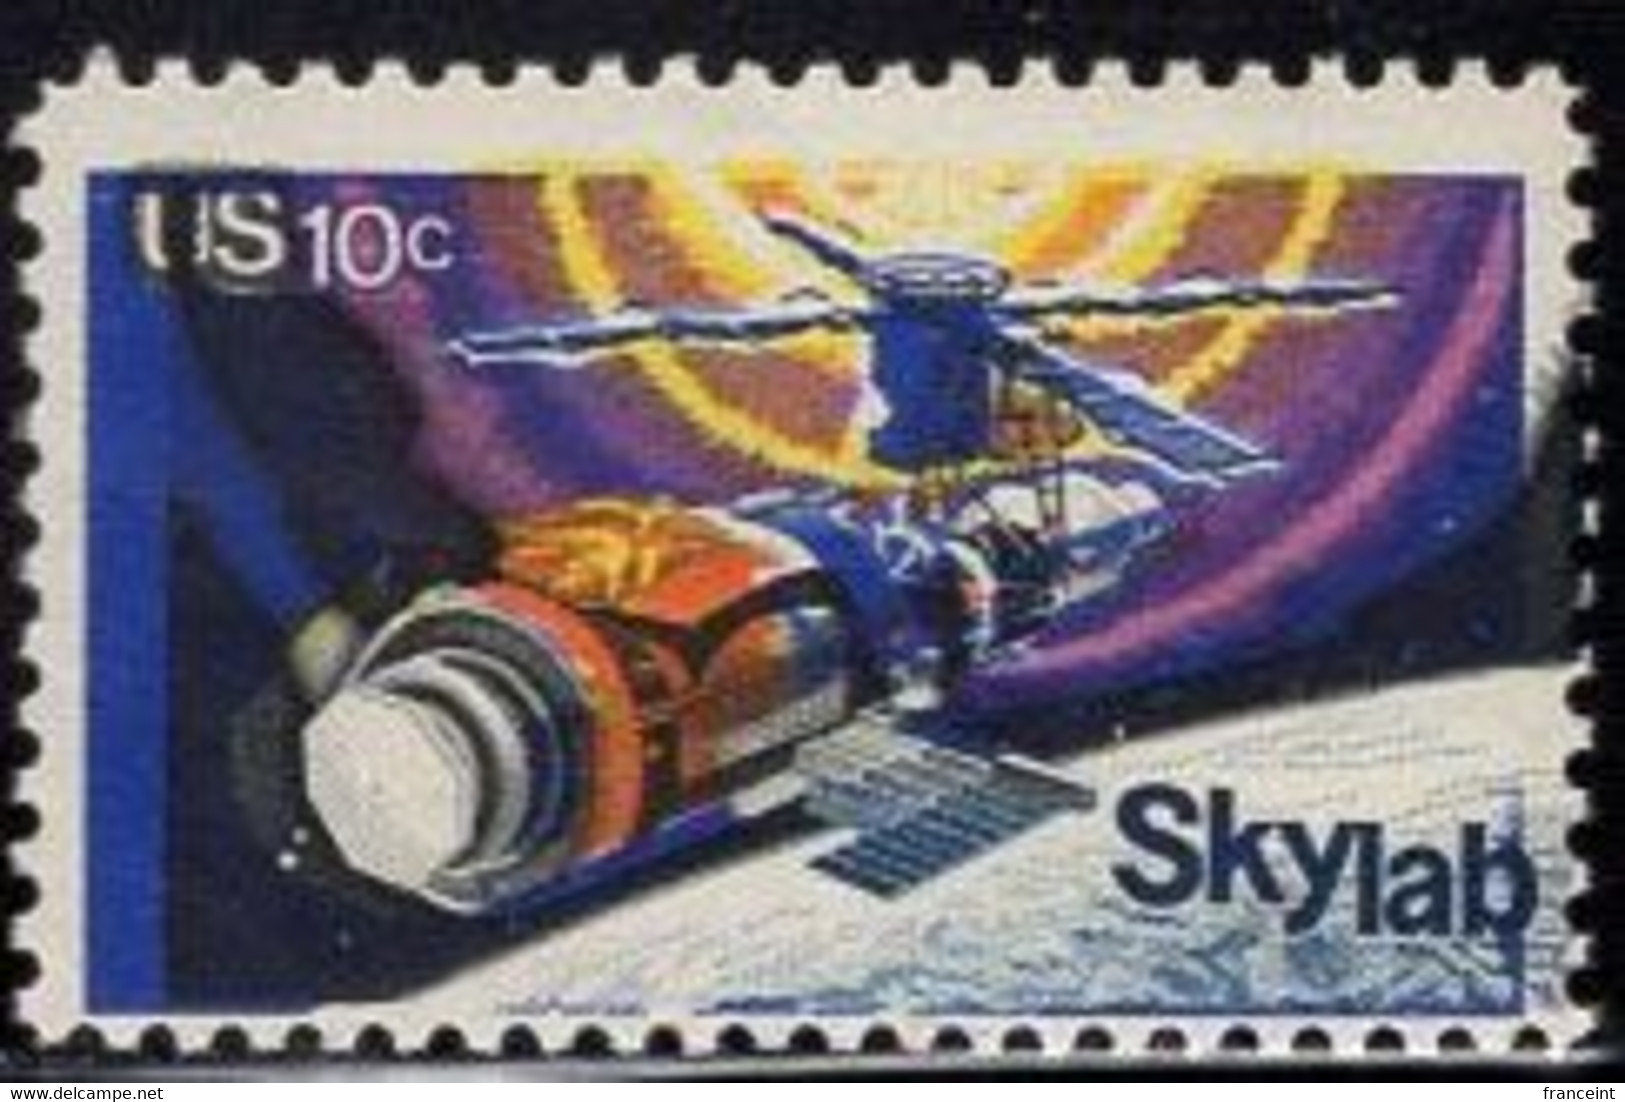 U.S.A.(1974) Skylab. Shift Of The Color Black 2mm To The Right. Scott No 1529. Yvert No 1016. Attractive Error. - Errors, Freaks & Oddities (EFOs)